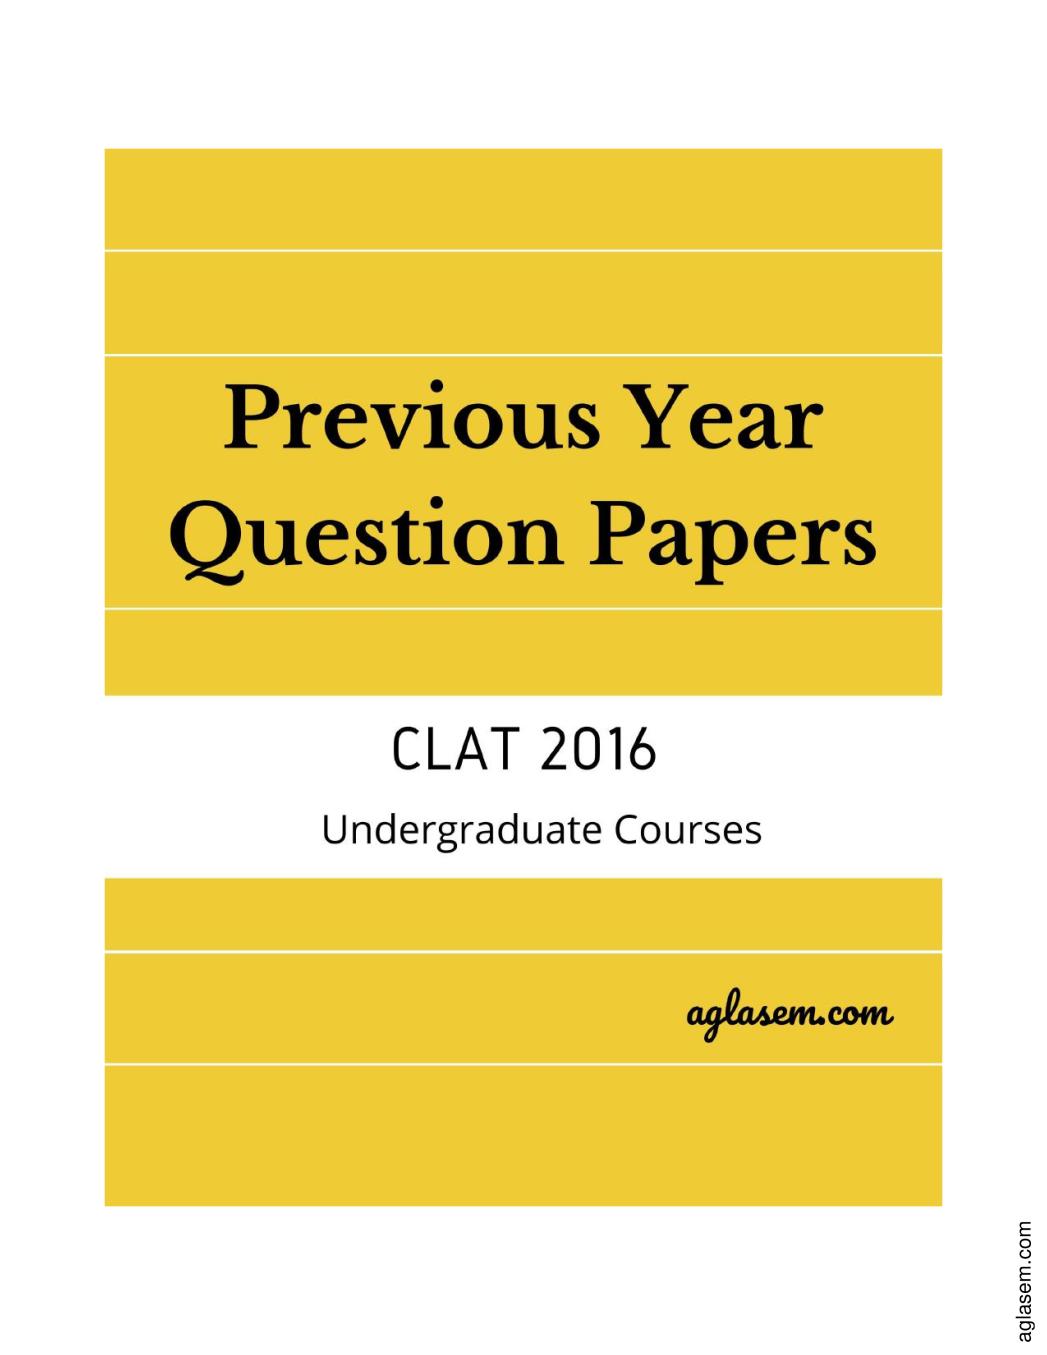 CLAT 2016 Question Paper with Answers - Page 1